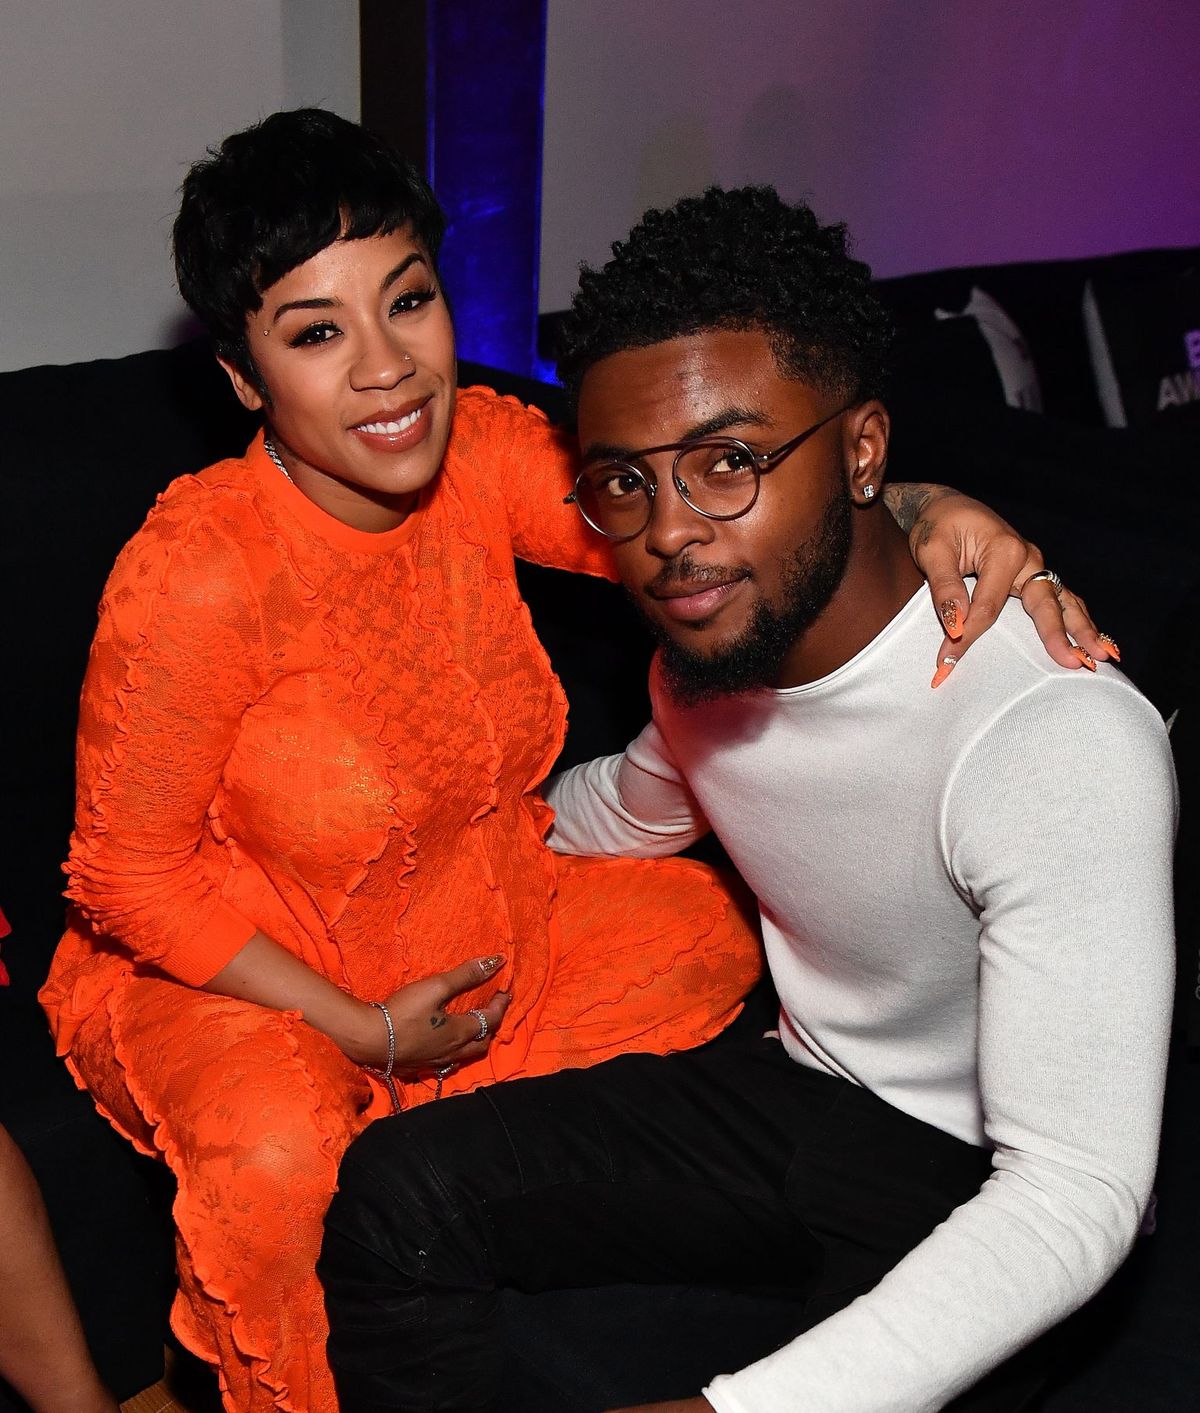 Keyshia Cole and Niko Hale at PREMIX Hosted By Connie Orlando at The Sunset Room on June 20, 2019 in Los Angeles, California | Photo: Getty Images